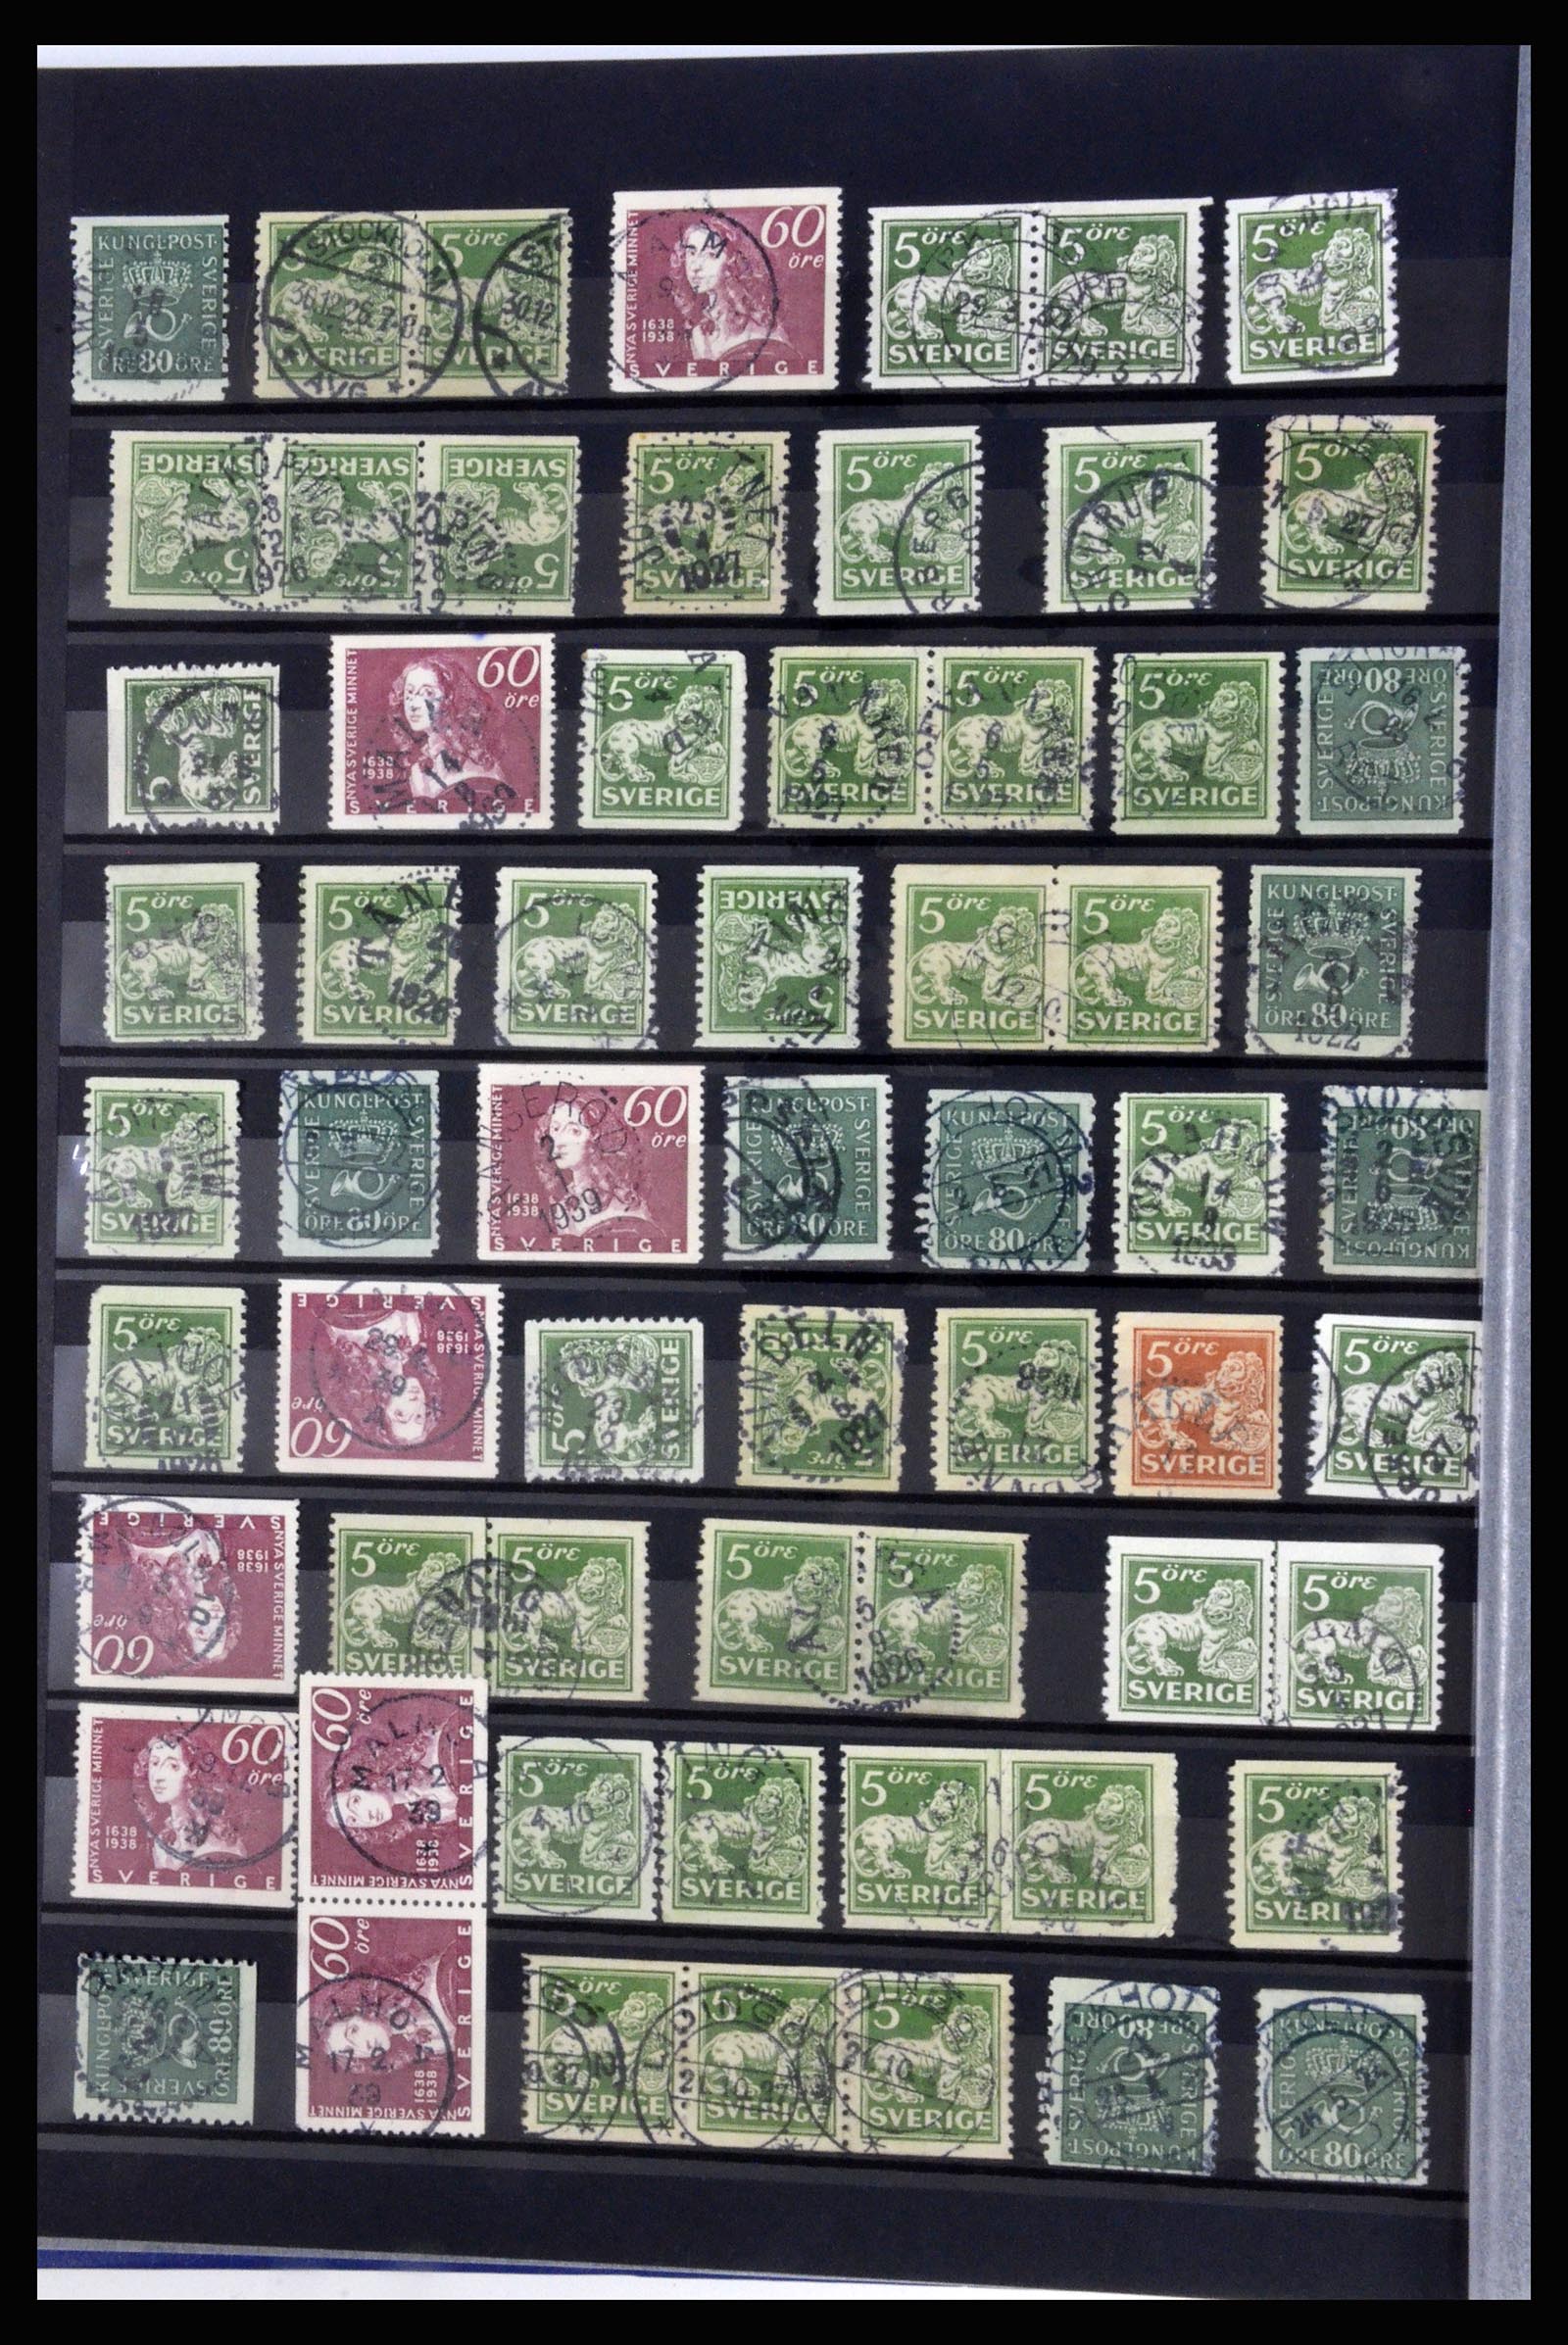 36316 016 - Stamp collection 36316 Sweden cancellations 1920-1938.